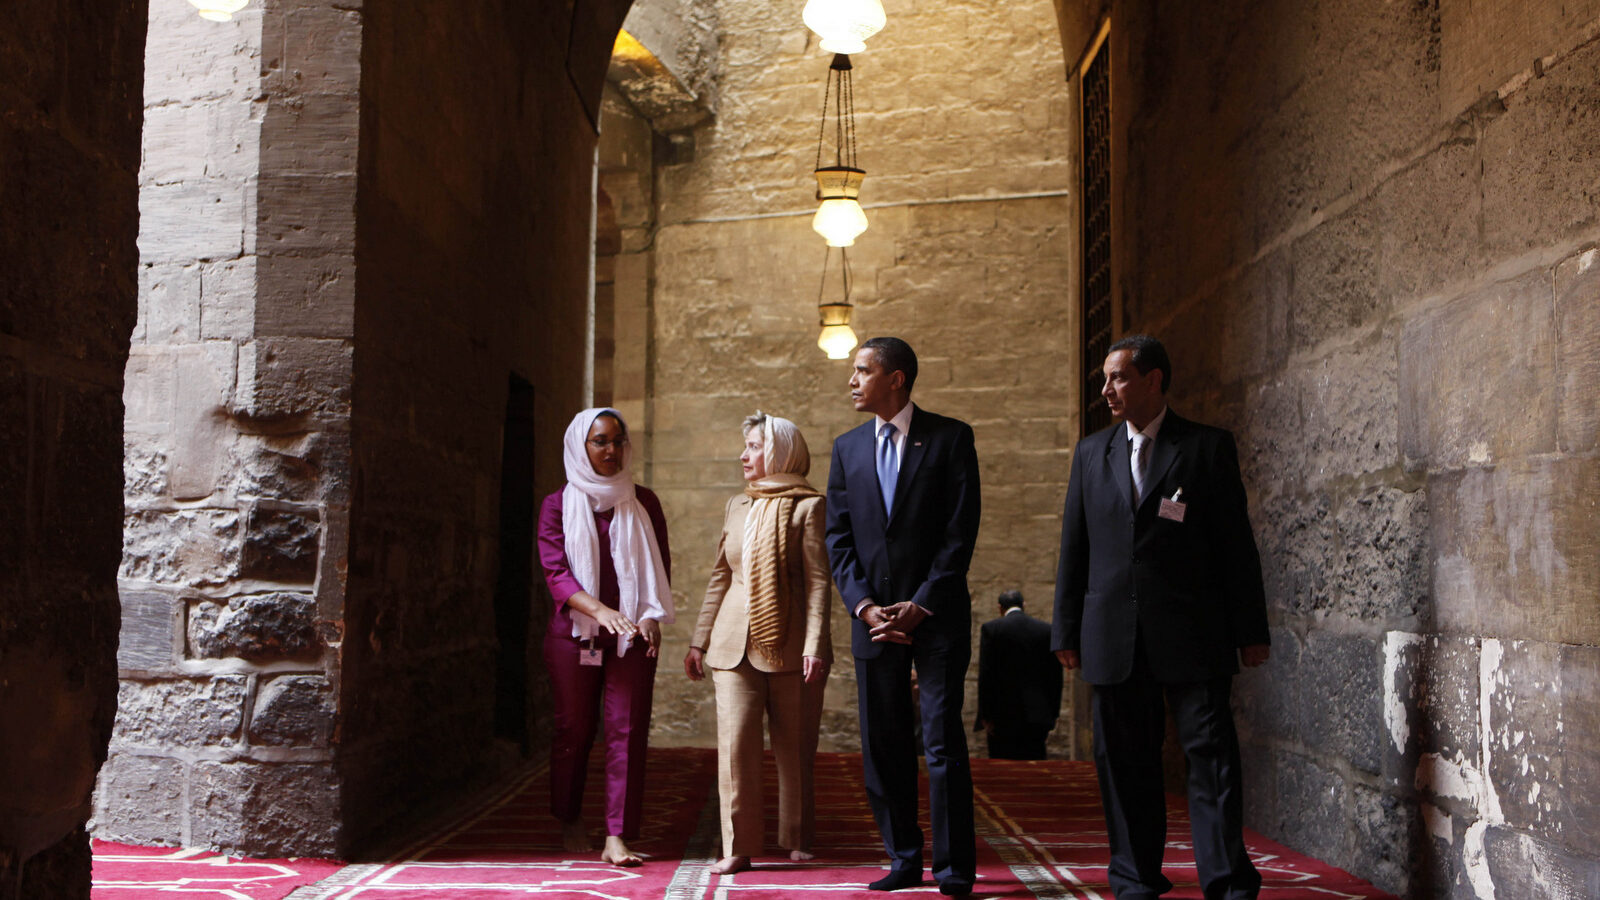 In this Thursday, June 4, 2009 file photo, U.S. President Barack Obama, 2nd right, tours the Sultan Hassan Mosque in Cairo, Egypt, with U.S. Secretary of State Hillary Rodham Clinton, 2nd left, Iman Abdel Fateh at left and Dr. Zahi Hawass, right. Obama's first visit to a U.S. mosque comes as Muslim-Americans say they're confronting increasing levels of bias in speech and deeds. Obama is scheduled to visit the Islamic Society of Baltimore on Wednesday, Feb. 3, 2016. (AP Photo/Gerald Herbert)